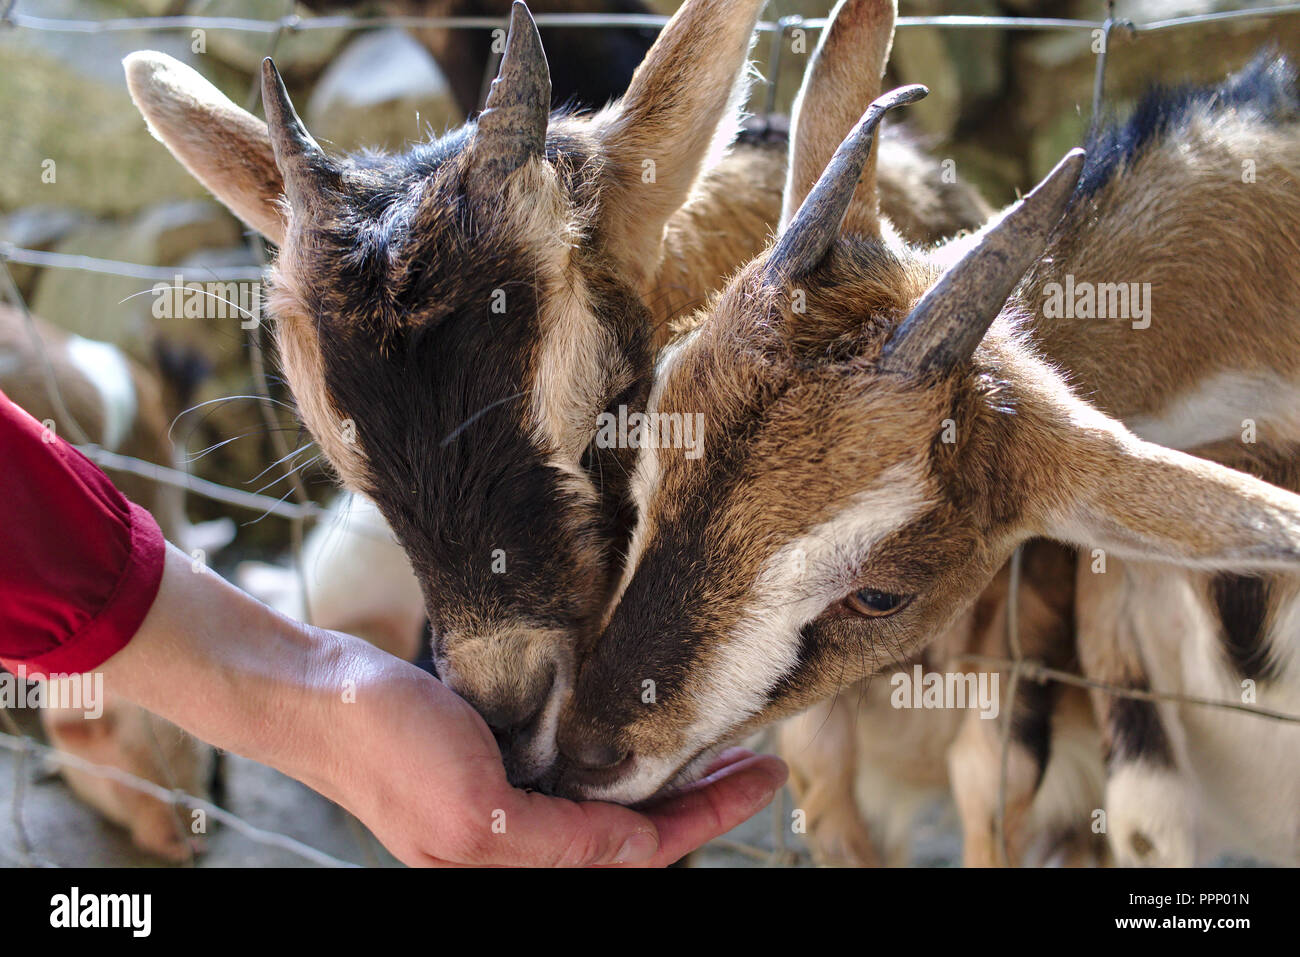 Two goats taking fodder from an outstretched human hand Stock Photo